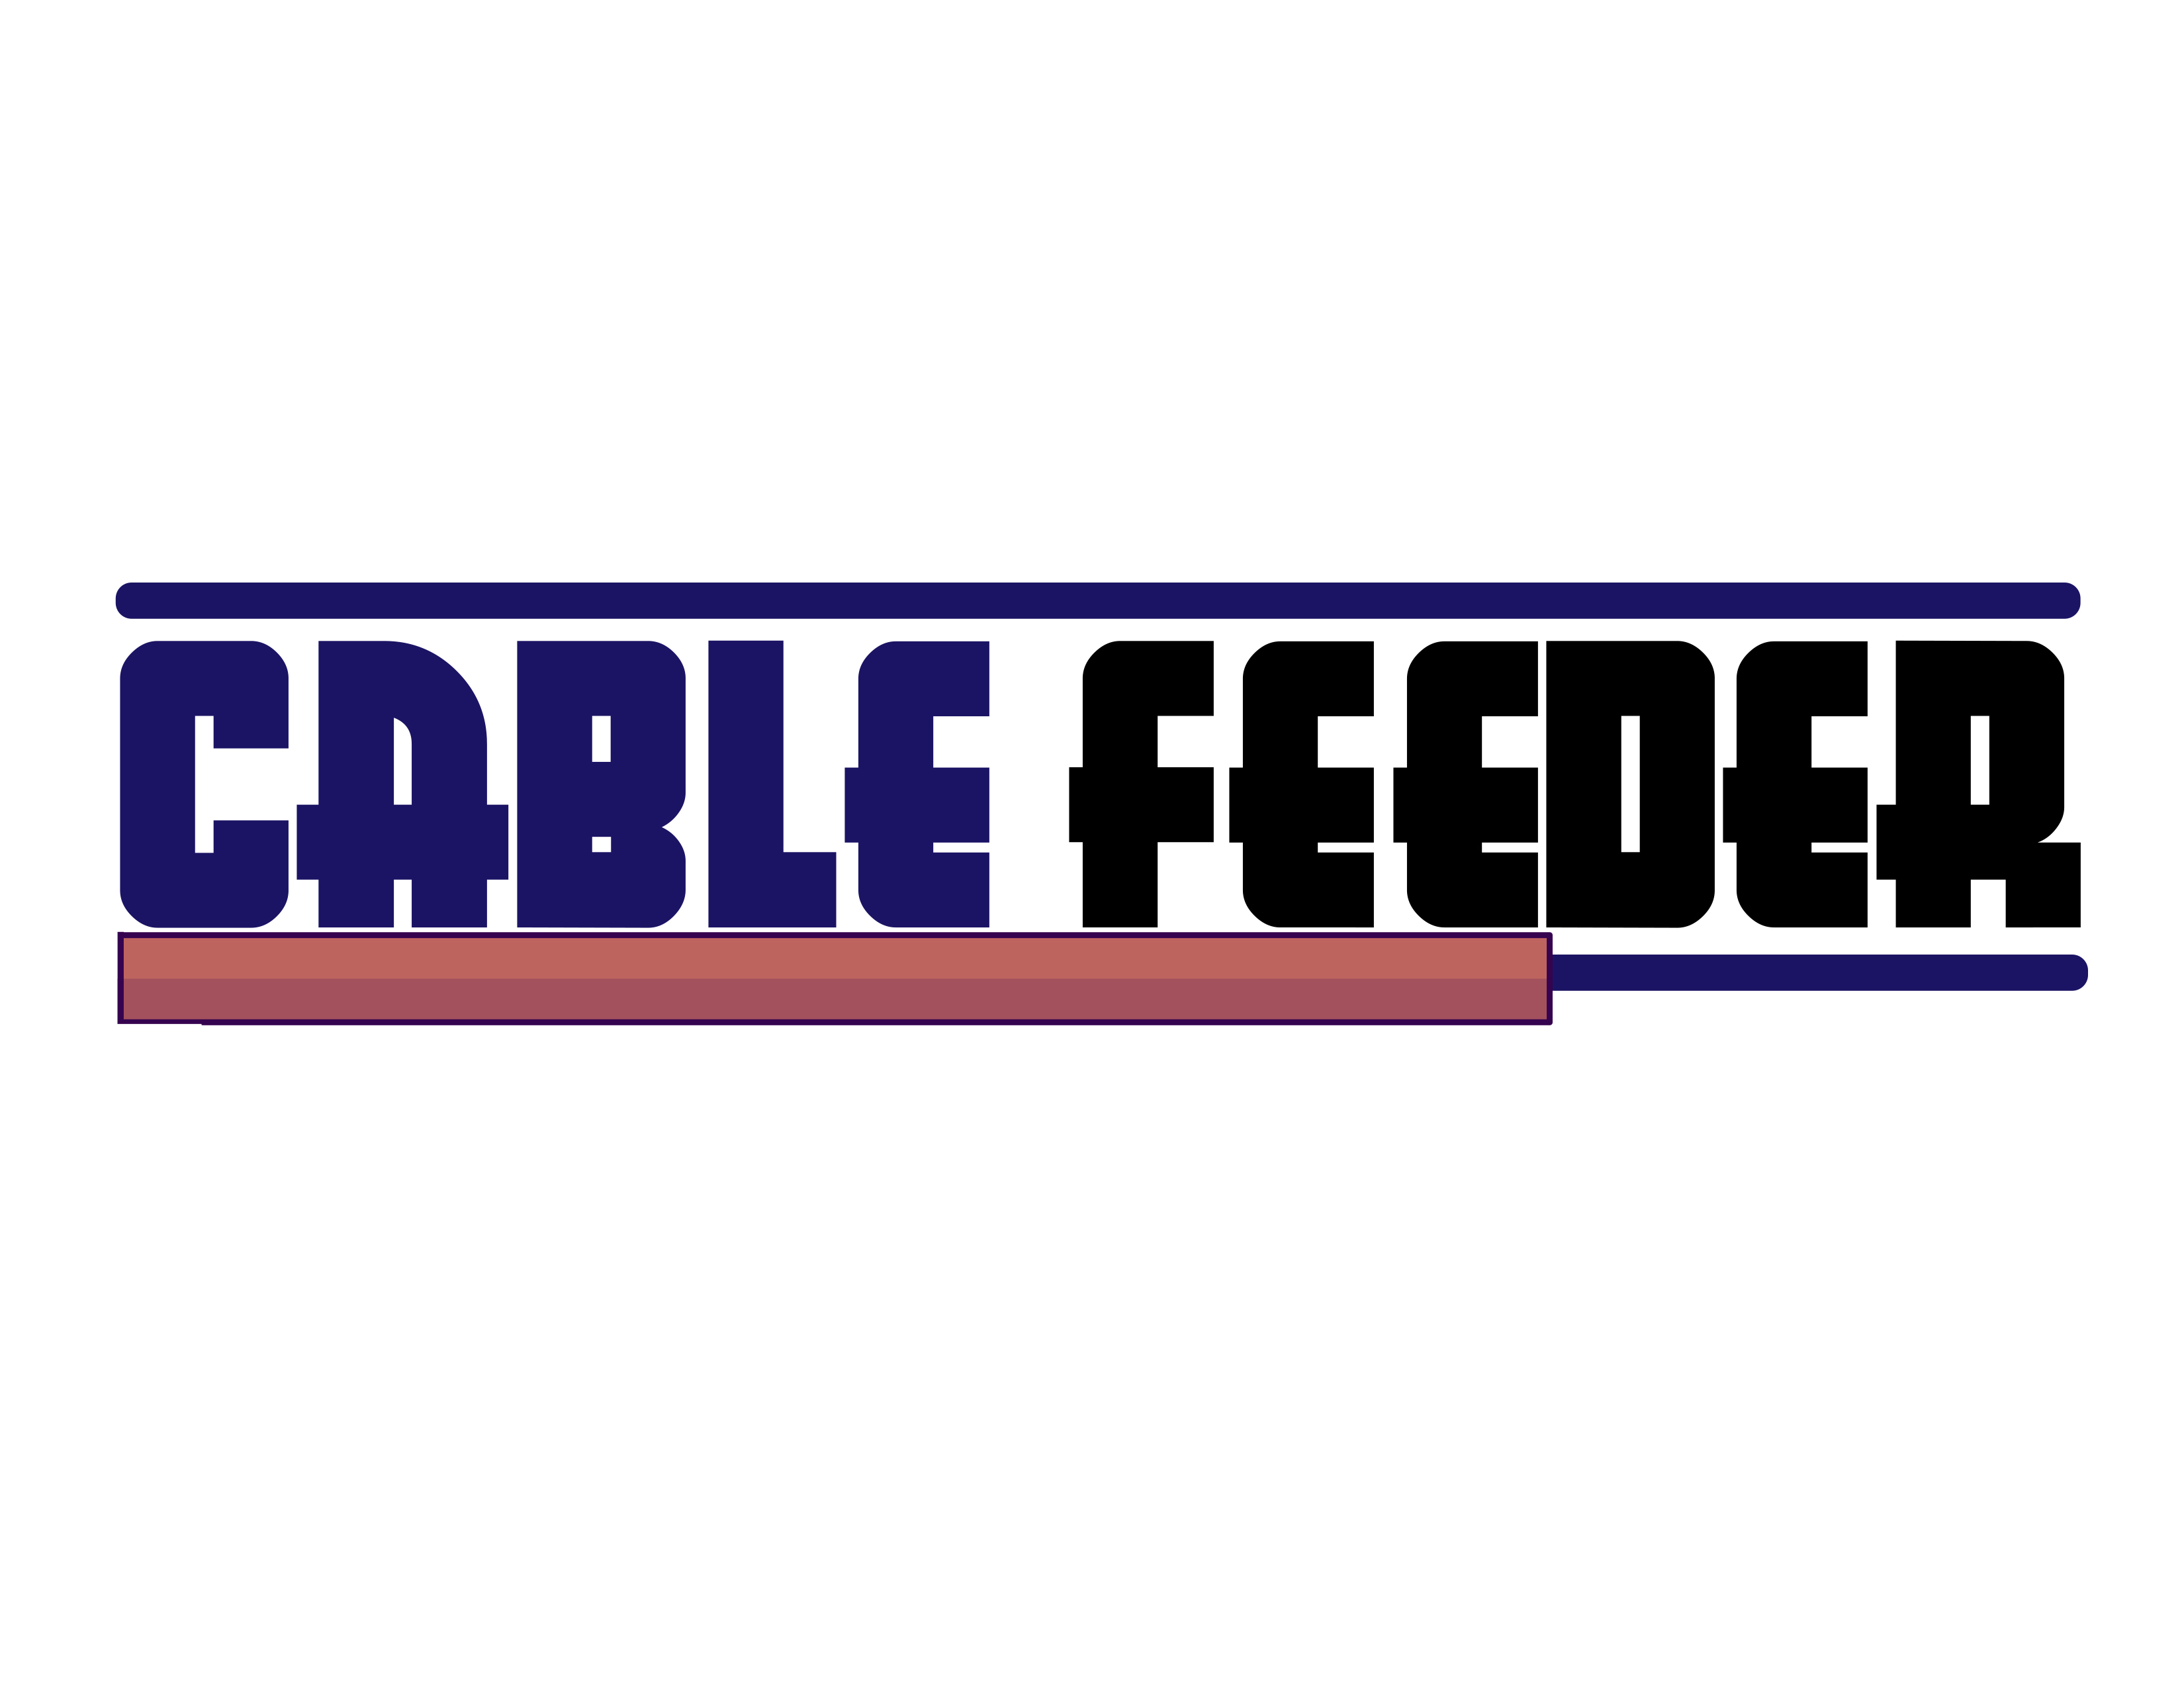 The Fiber Feeder is a cable invention that will greatly help construction workers work more efficiently.